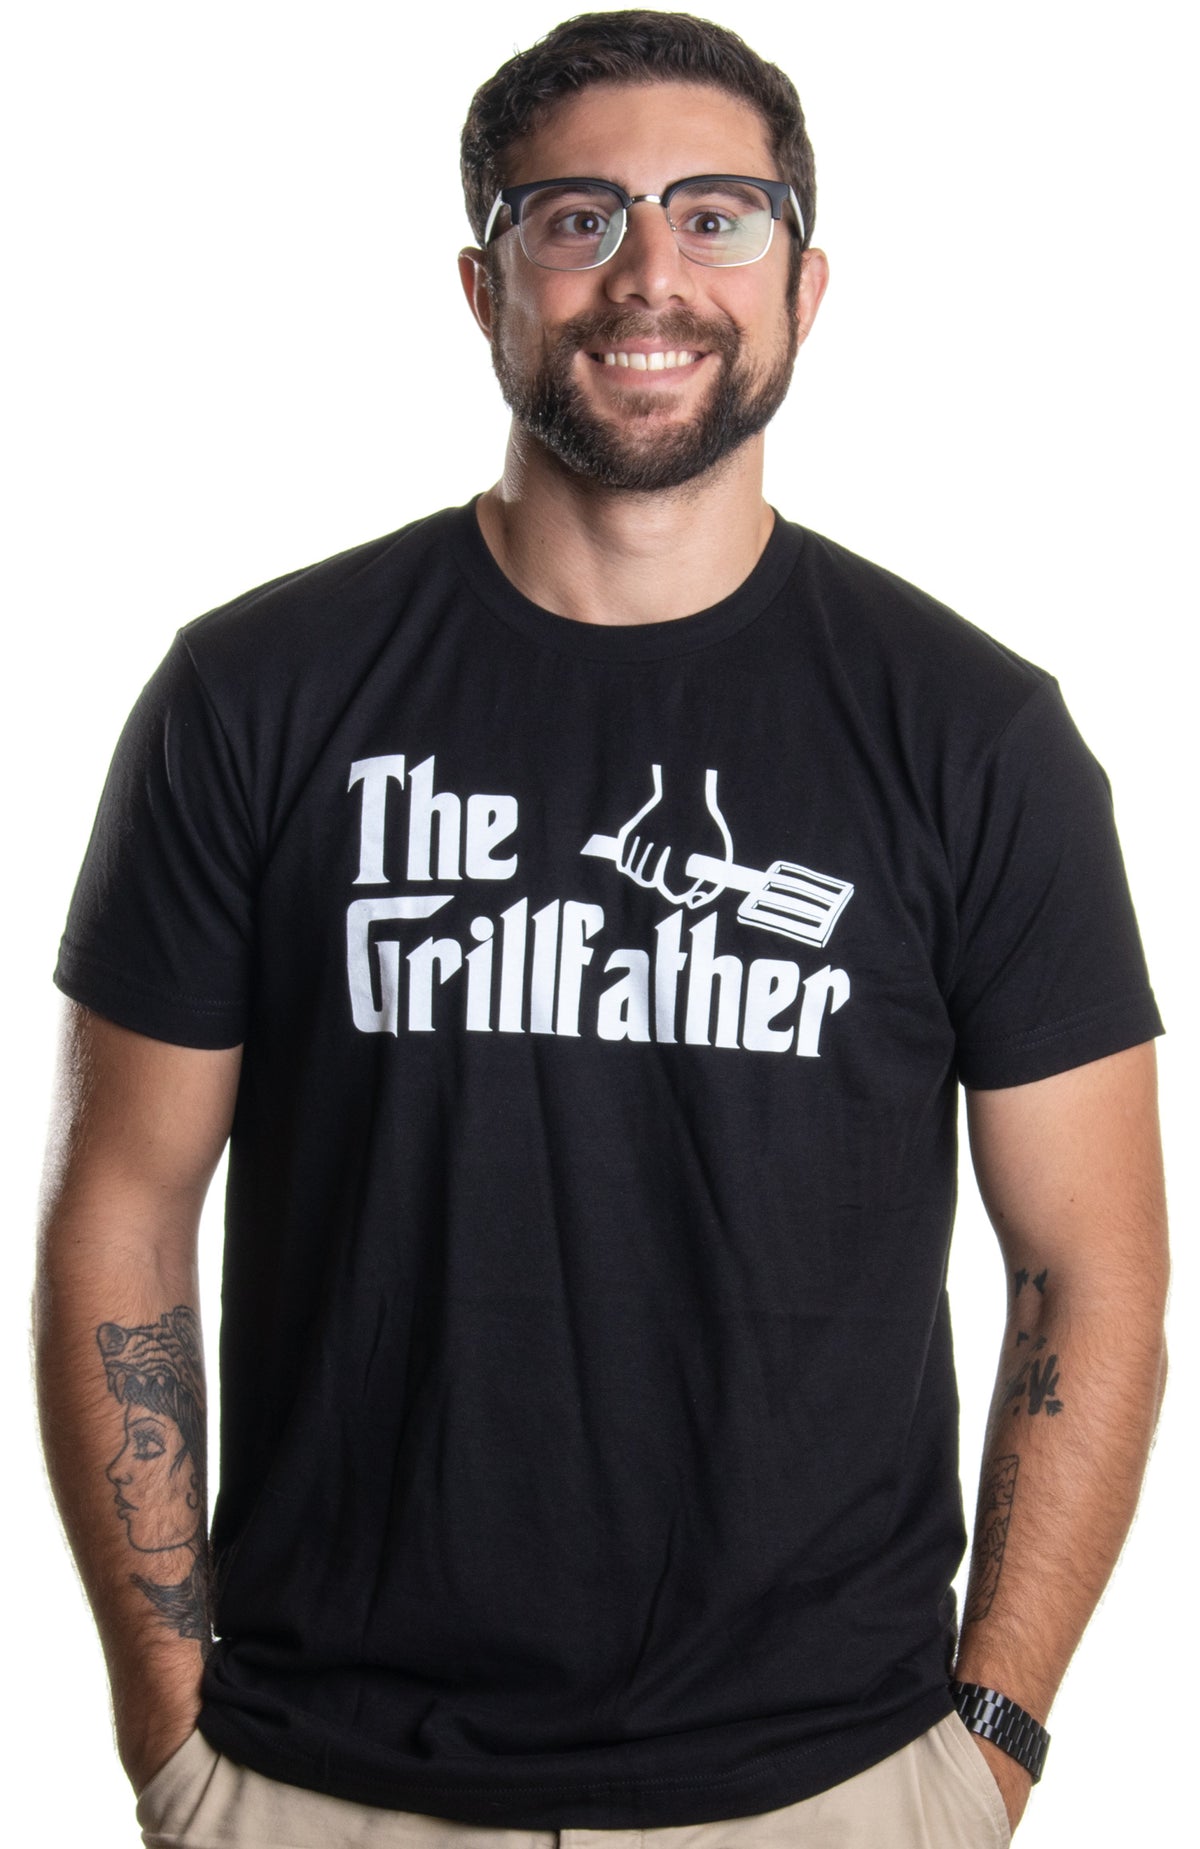 The Grillfather - Funny Dad Grandpa Grilling BBQ Meat T-shirt Joke for Men